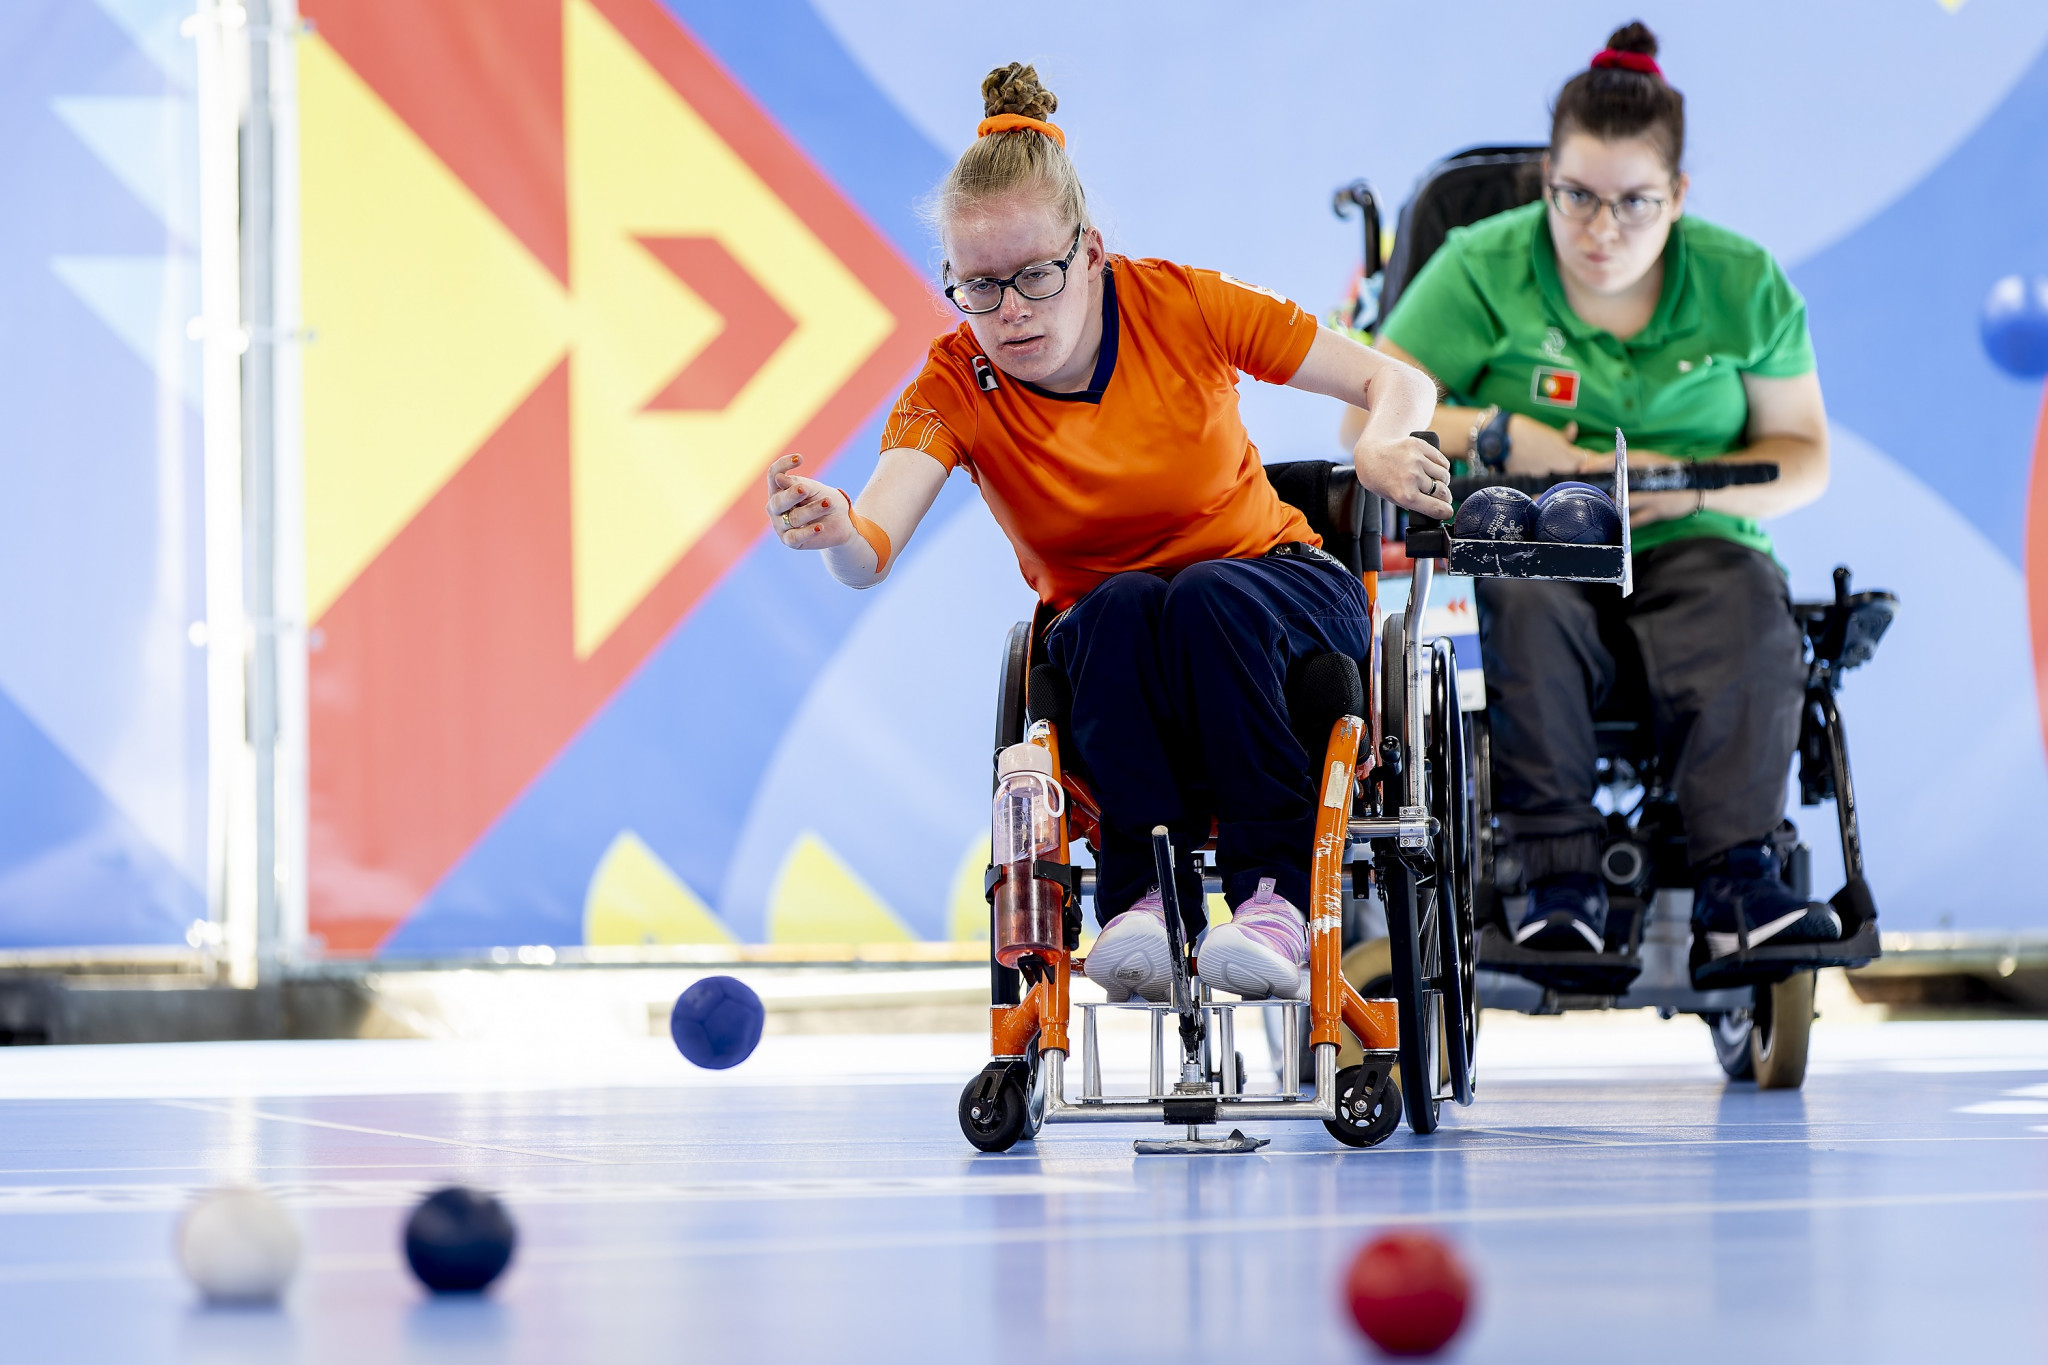 Chantal van Engelen, left, of The Netherlands overcame Portugal’s Anna Correia, right, in the women’s BC2 final ©EPC